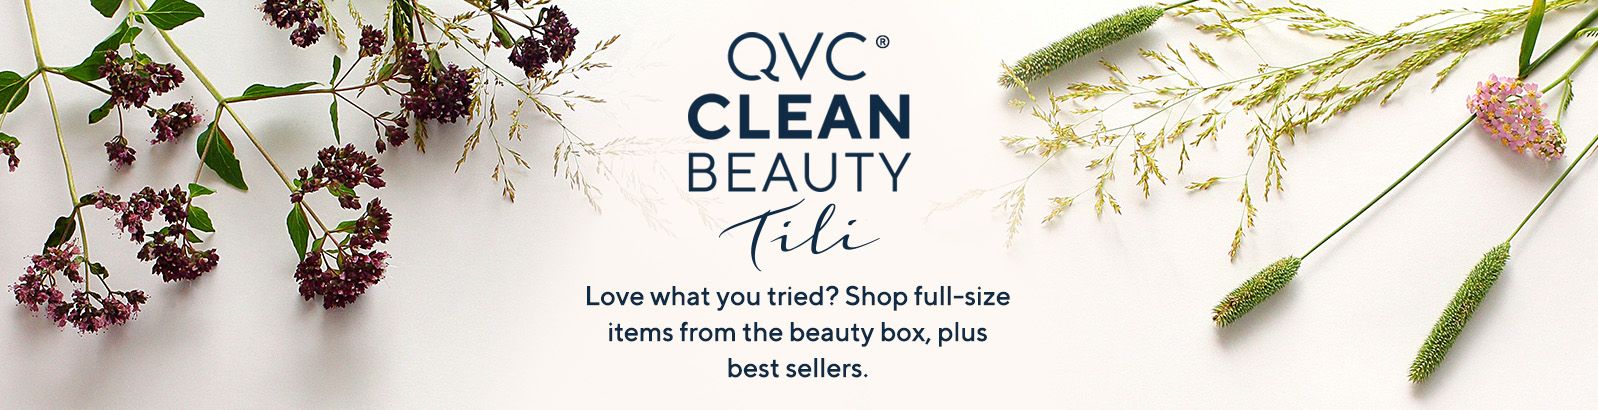 QVC® Clean Beauty TILI - Love what you tried? Shop full-size items from the beauty box, plus best sellers.